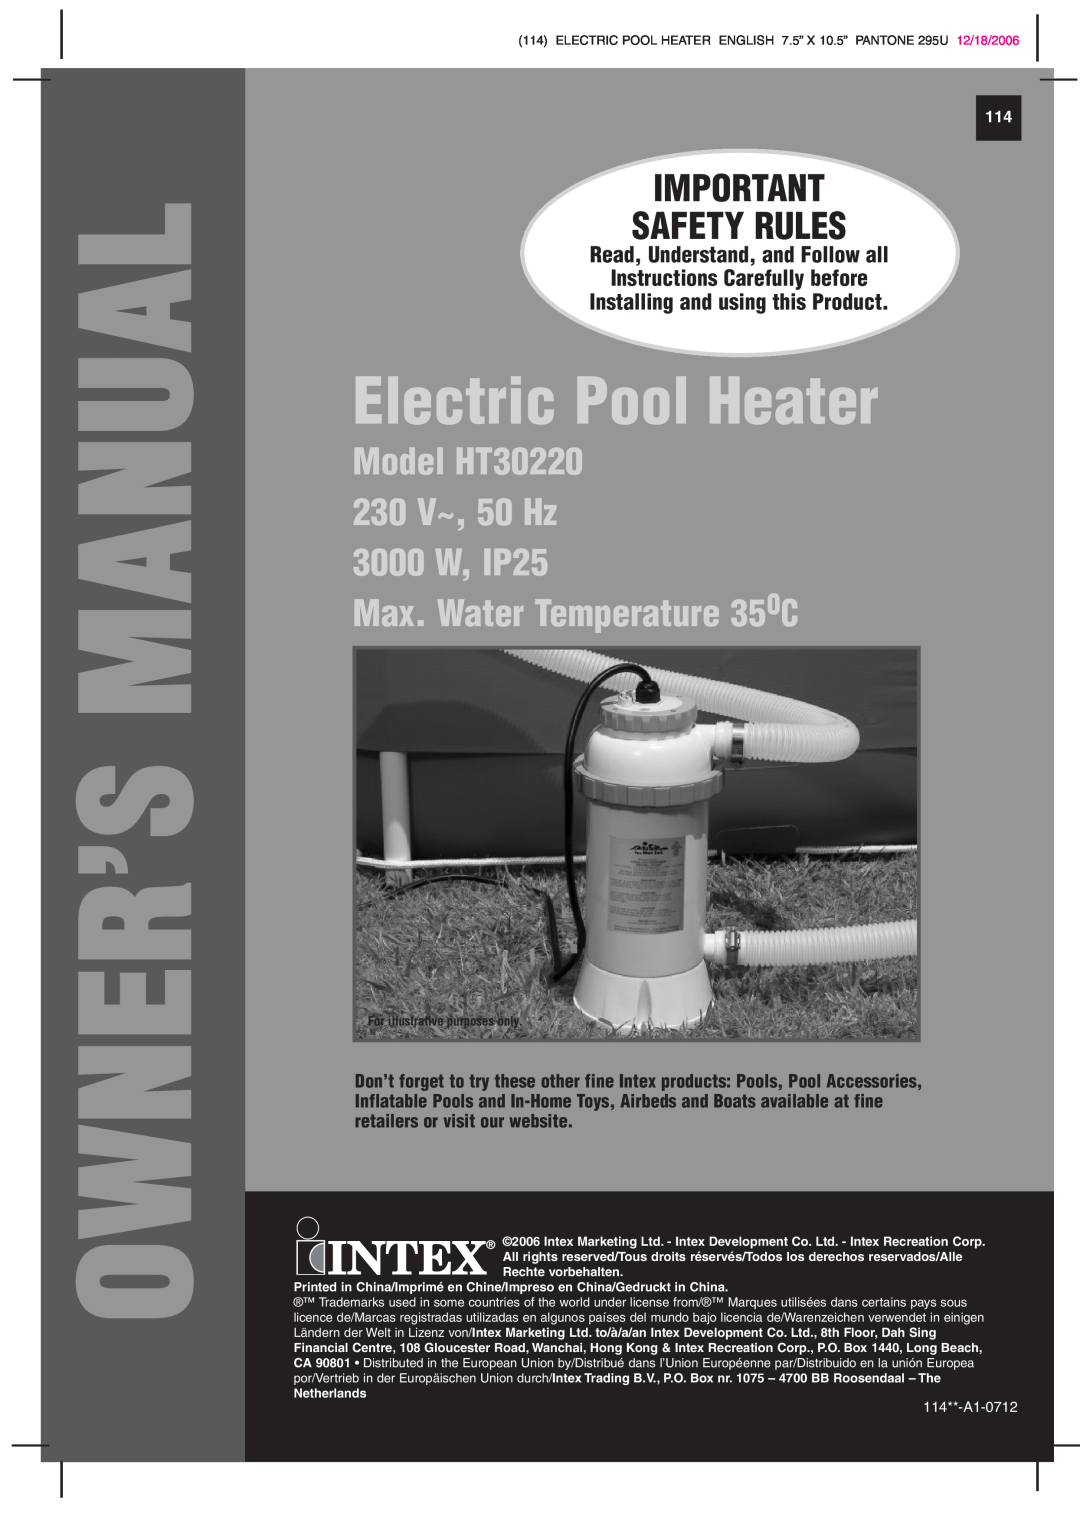 Intex Recreation manual Safety Rules, Electric Pool Heater, Model HT30220 230 V~, 50 Hz 3000 W, IP25, 114**-A1-0712 